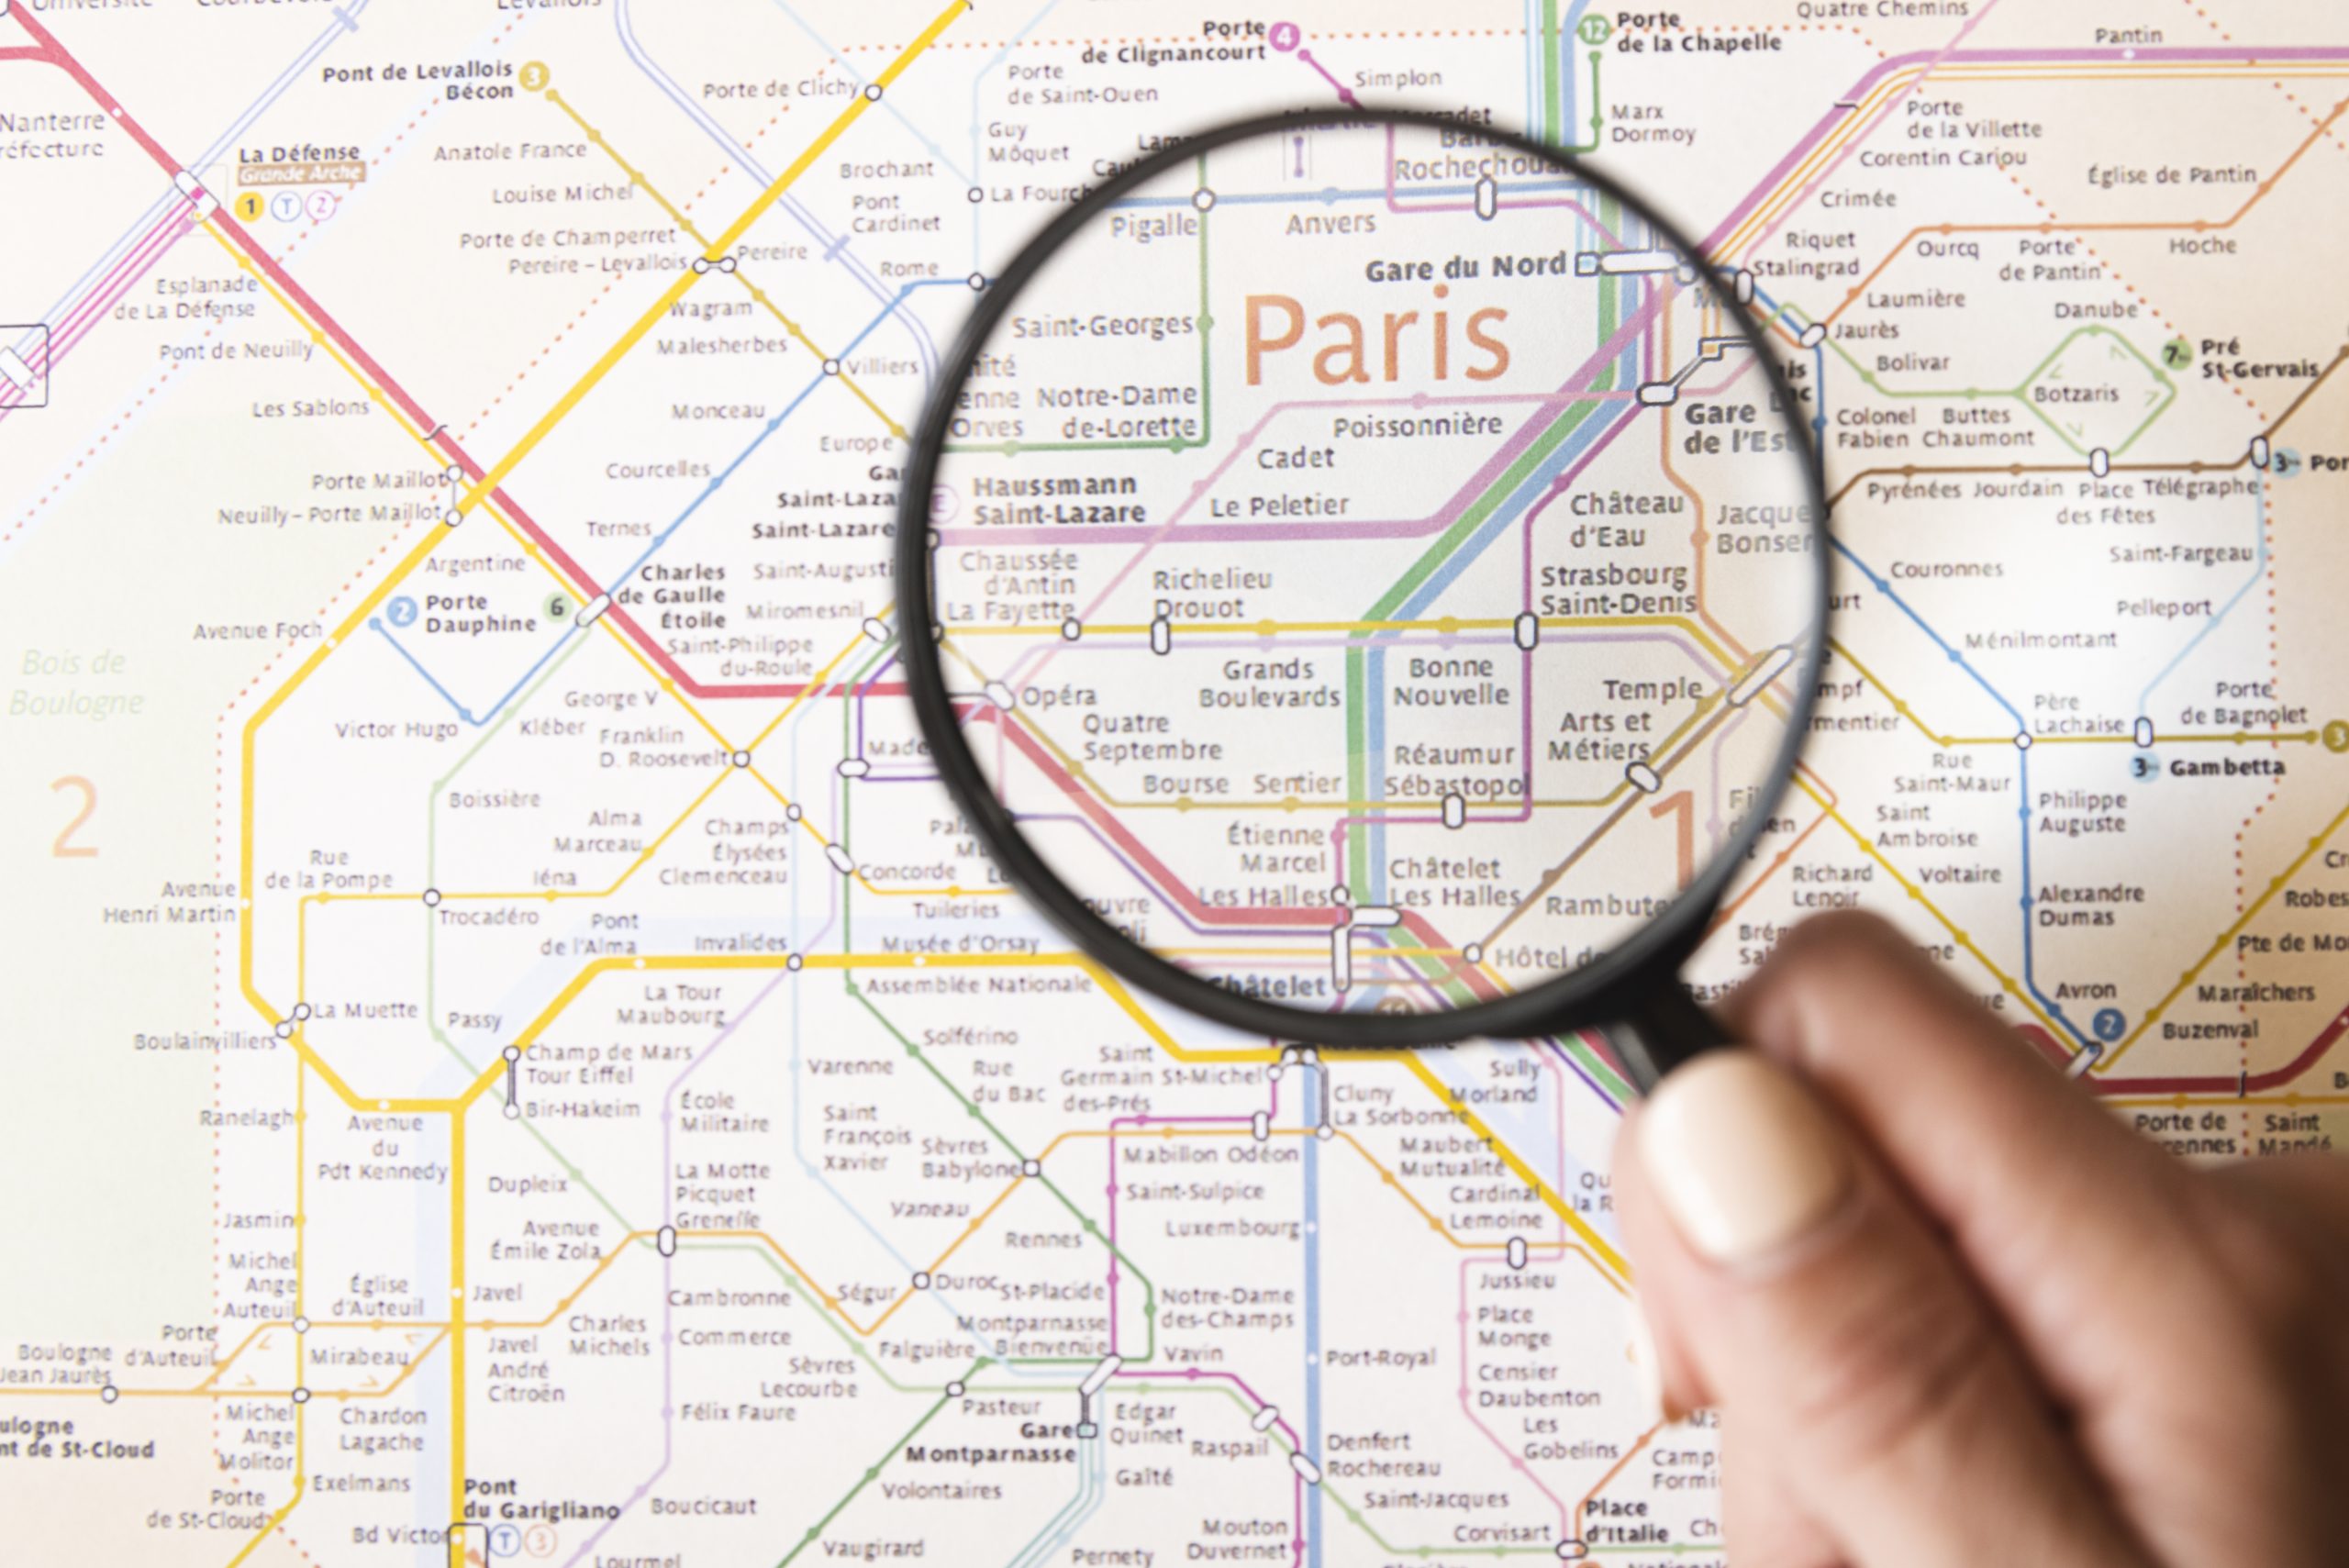 Someone holds a magnifying glass over the word "Paris" on a map of the Paris metro system